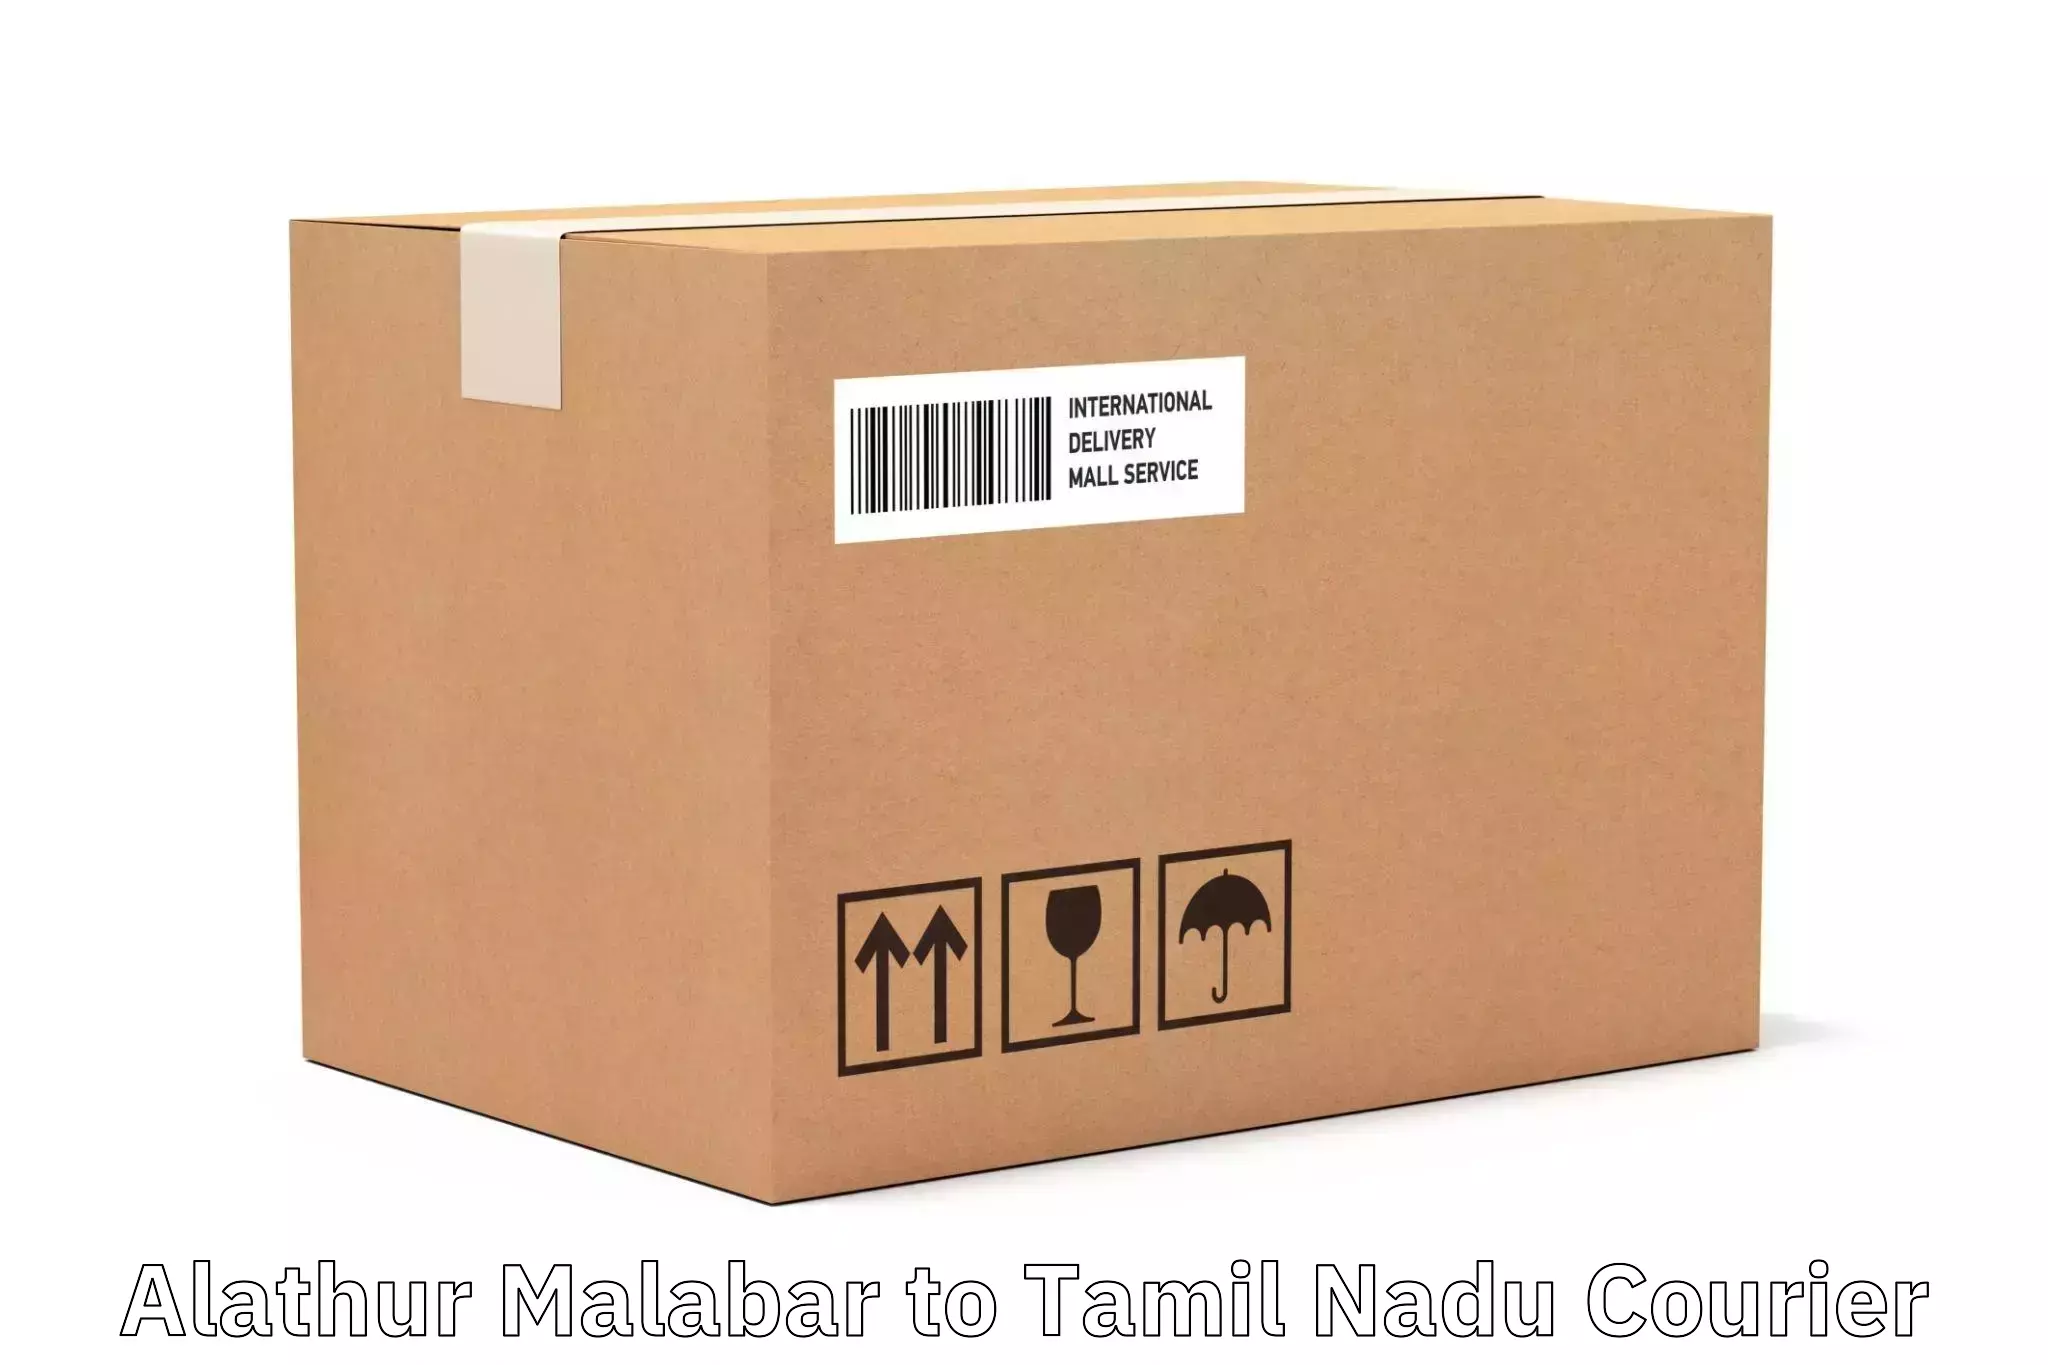 Expedited shipping methods Alathur Malabar to Ooty